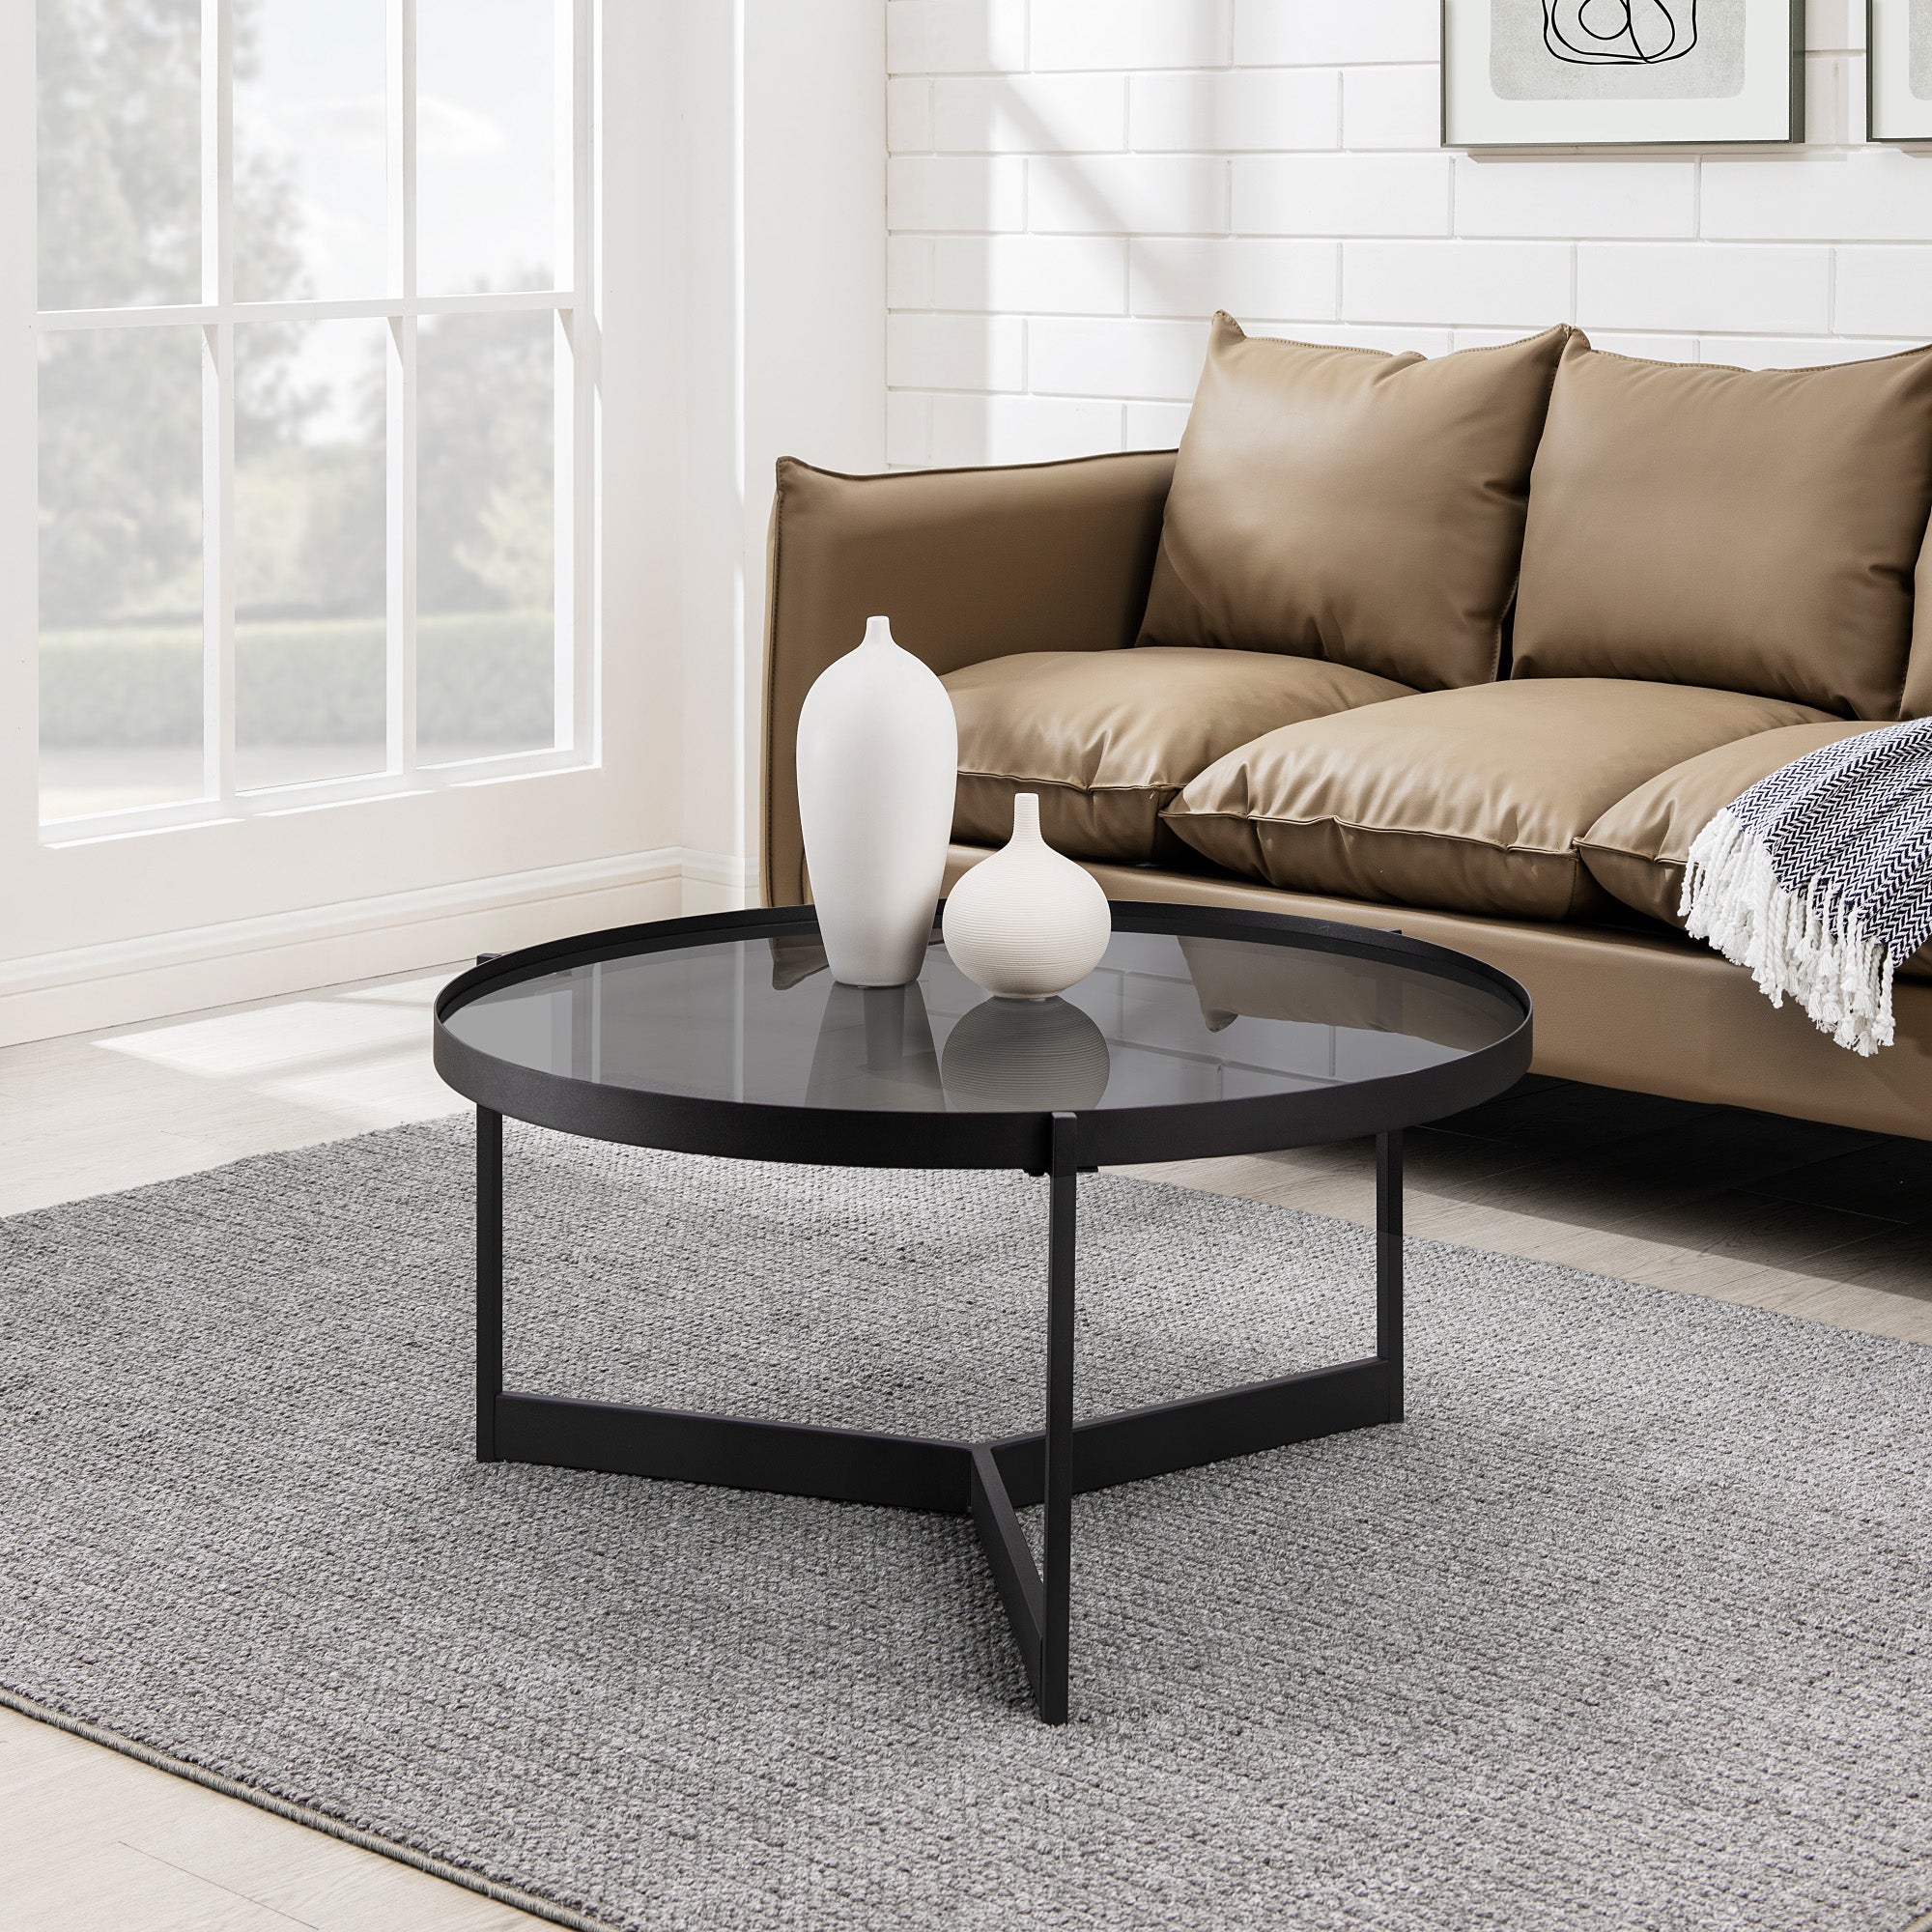 Modern Glass and Metal Round Coffee Table